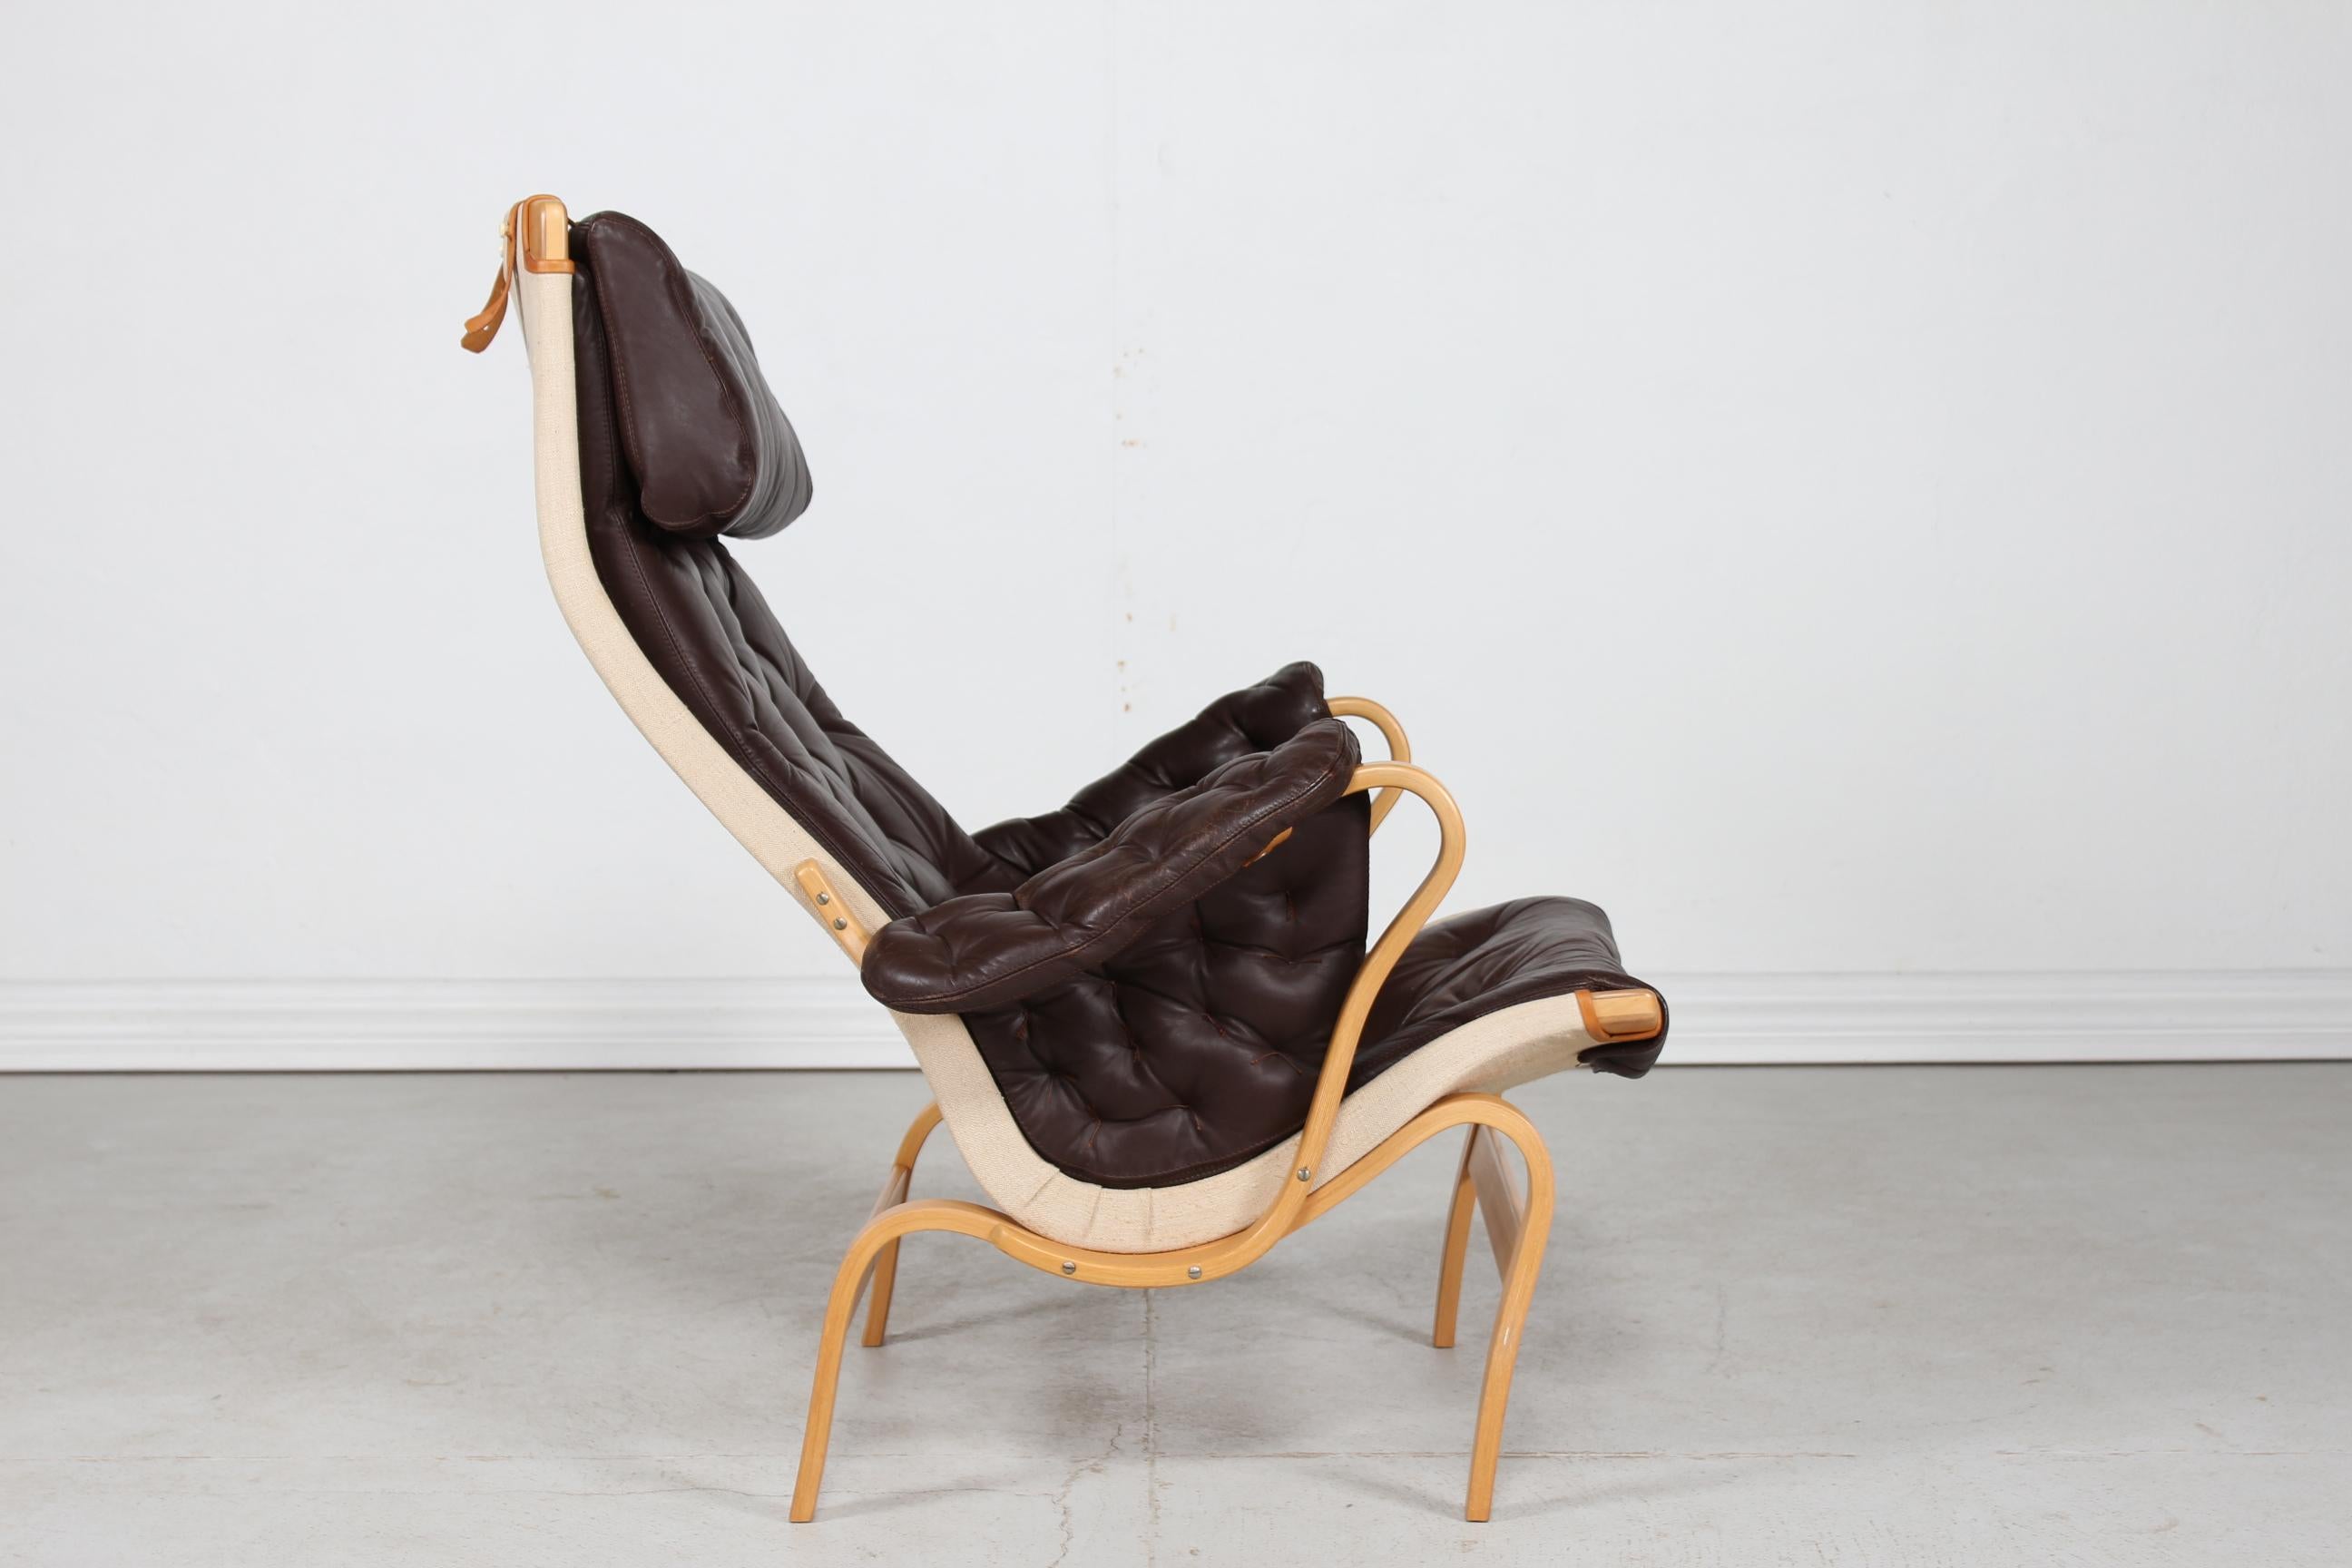 Scandinavian modern easy chair/ lounge chair model Pernilla manufactured by Dux of Sweden. Designed by architect and designer Bruno Mathsson in 1944.
The frame is made of steam bend beech with lacquer and the cushions are upholstered with mocha